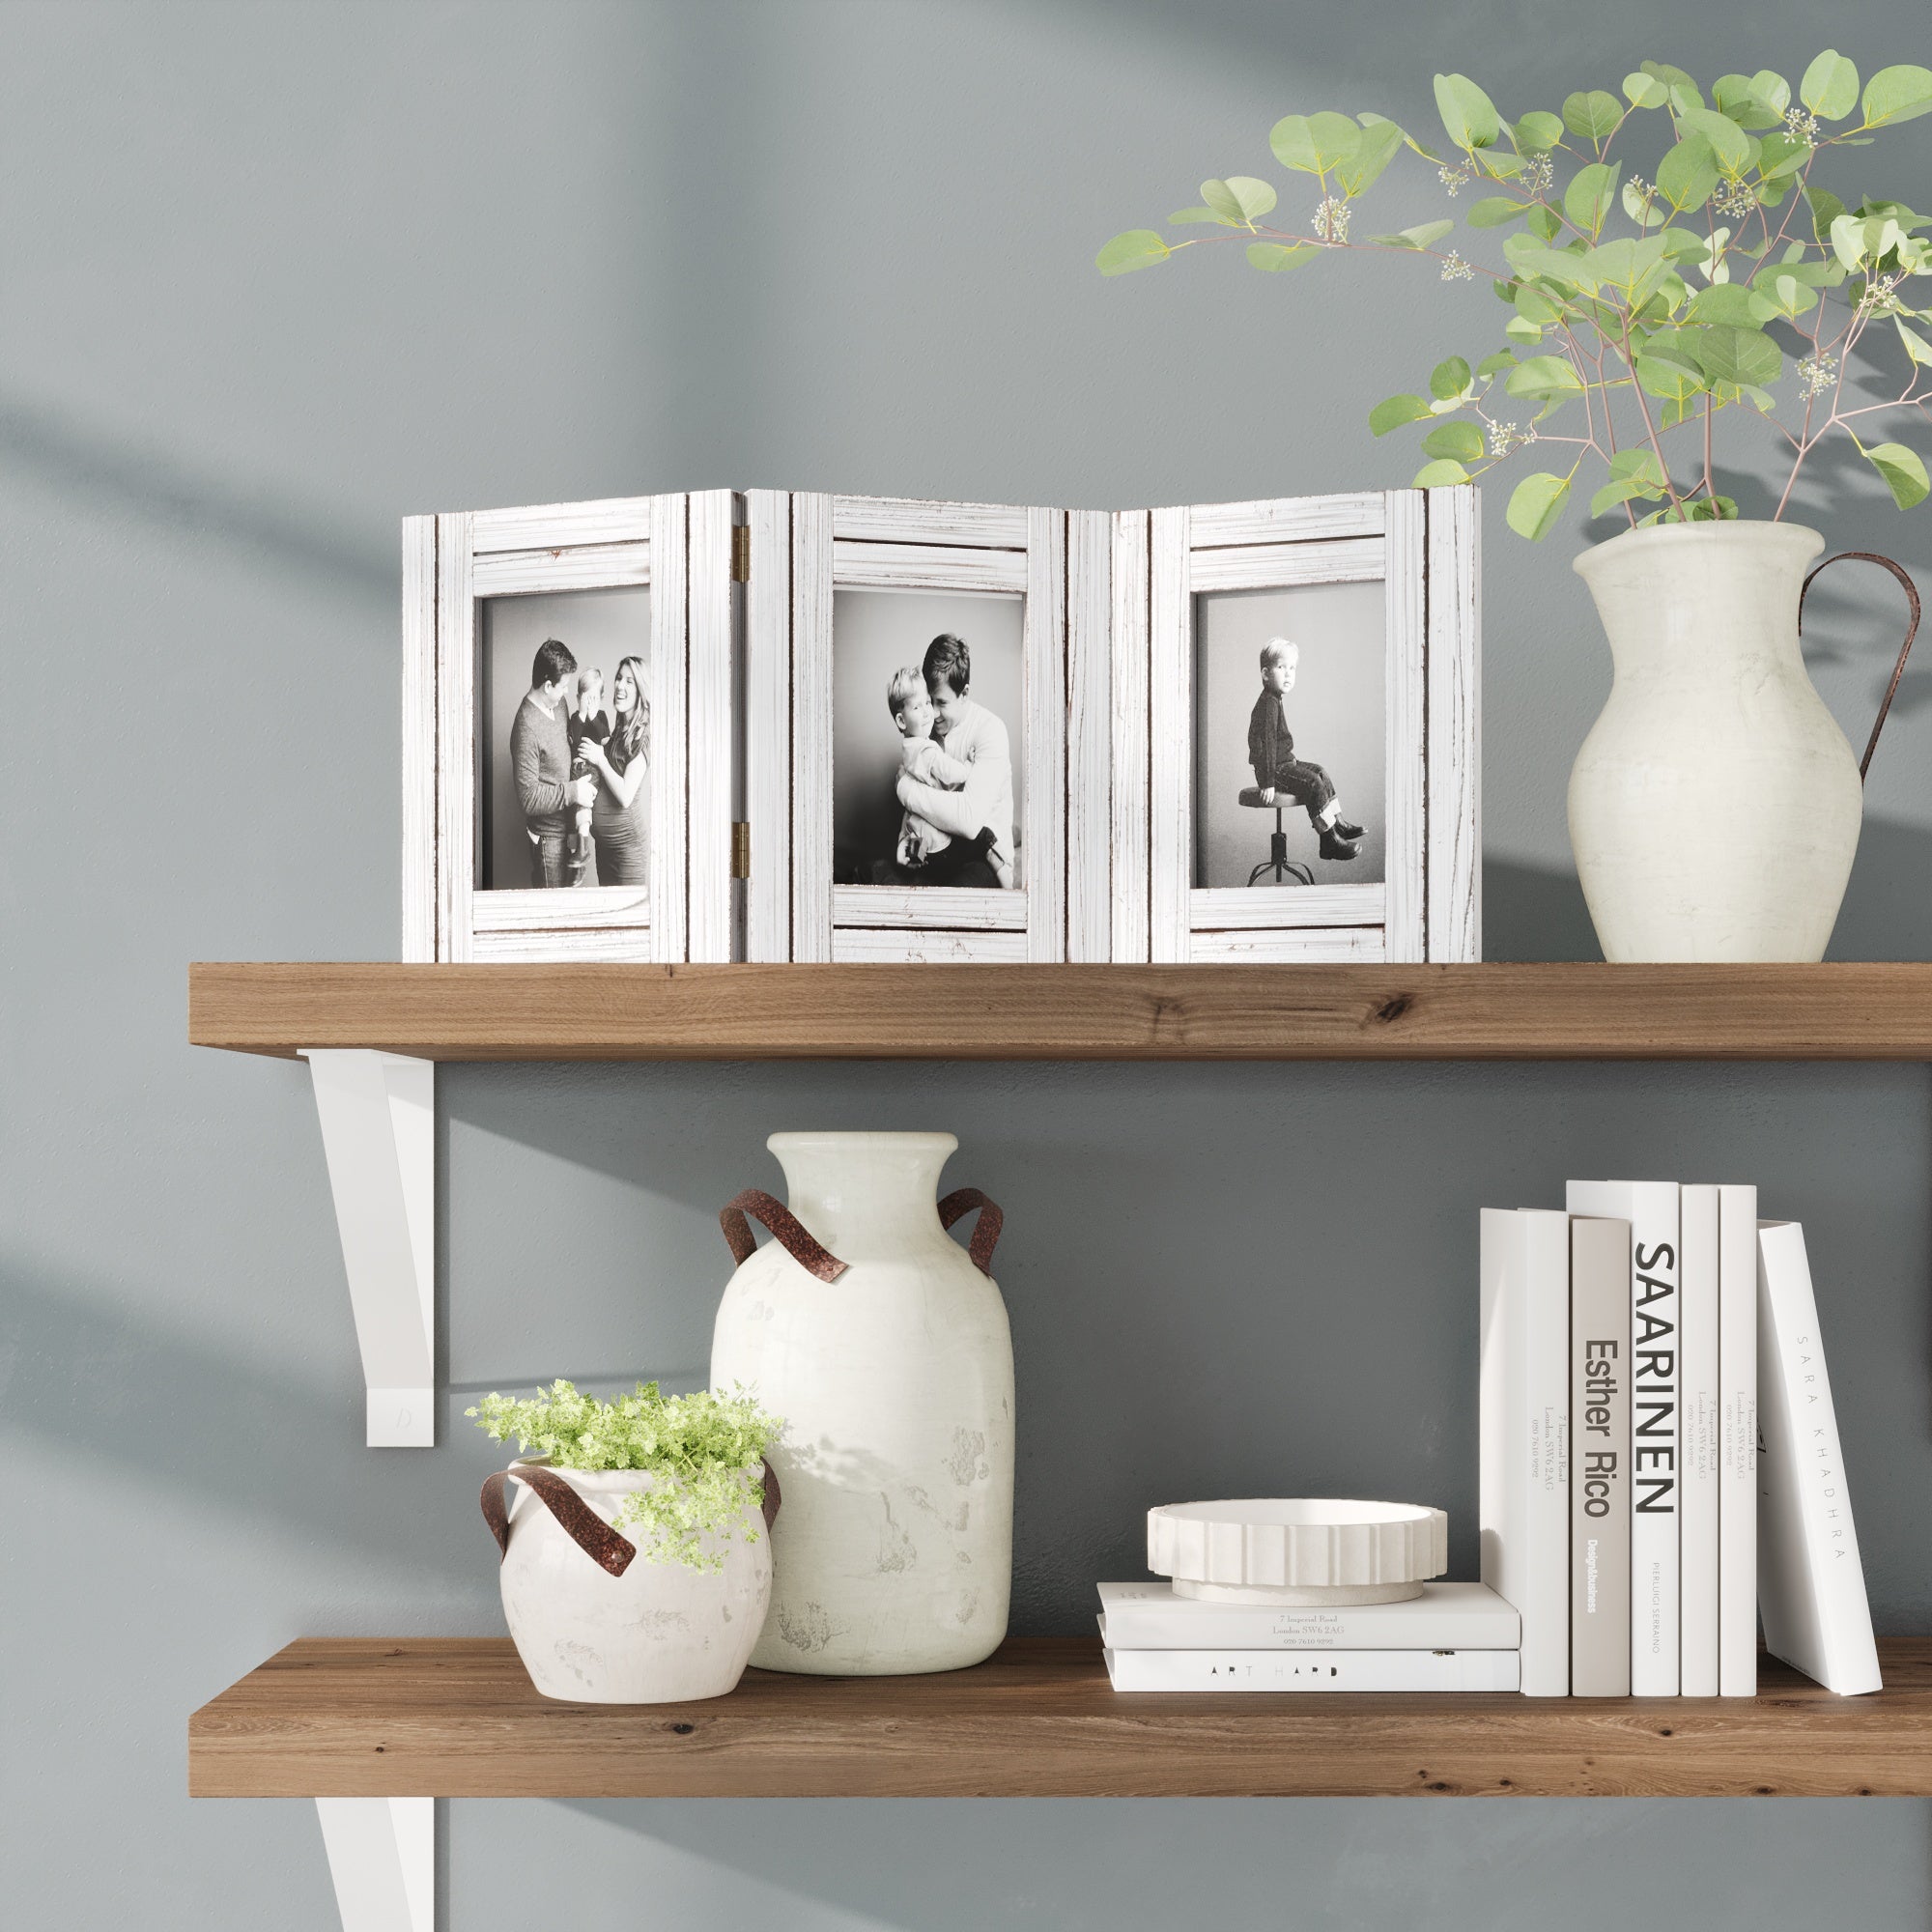 Rustic Picture Frames - White Frame